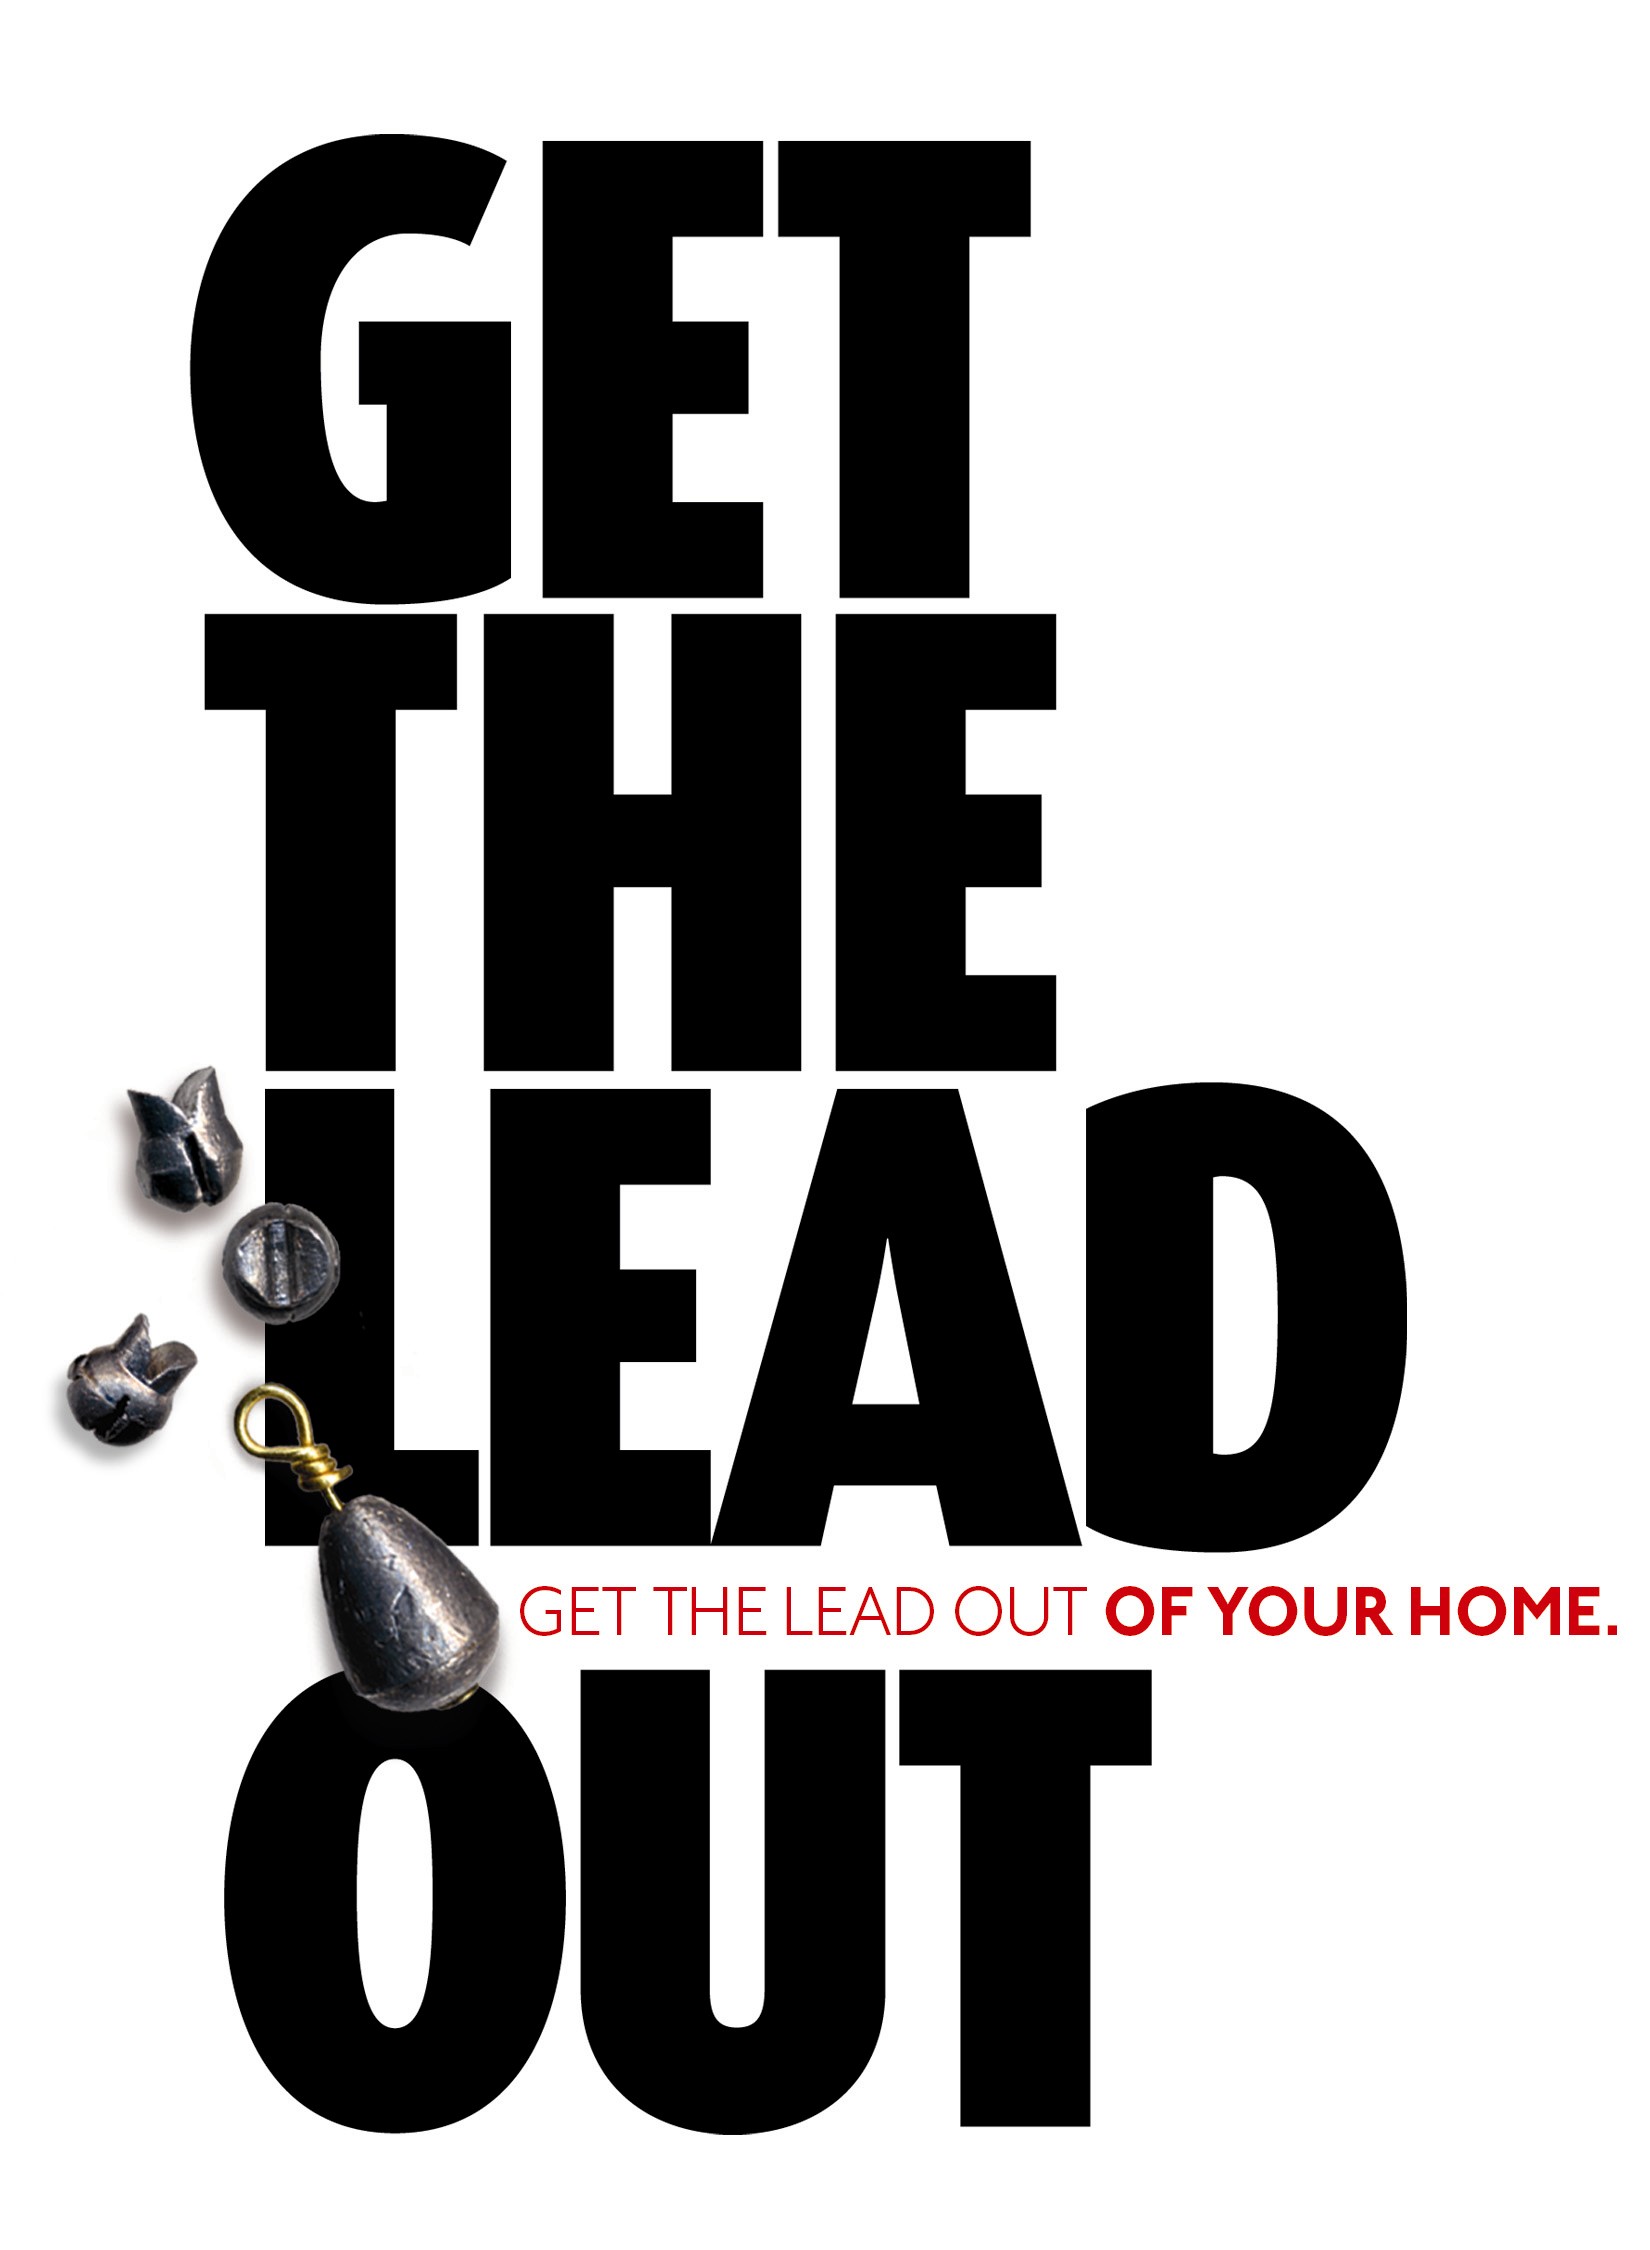 lead poisoning gettheleadout21